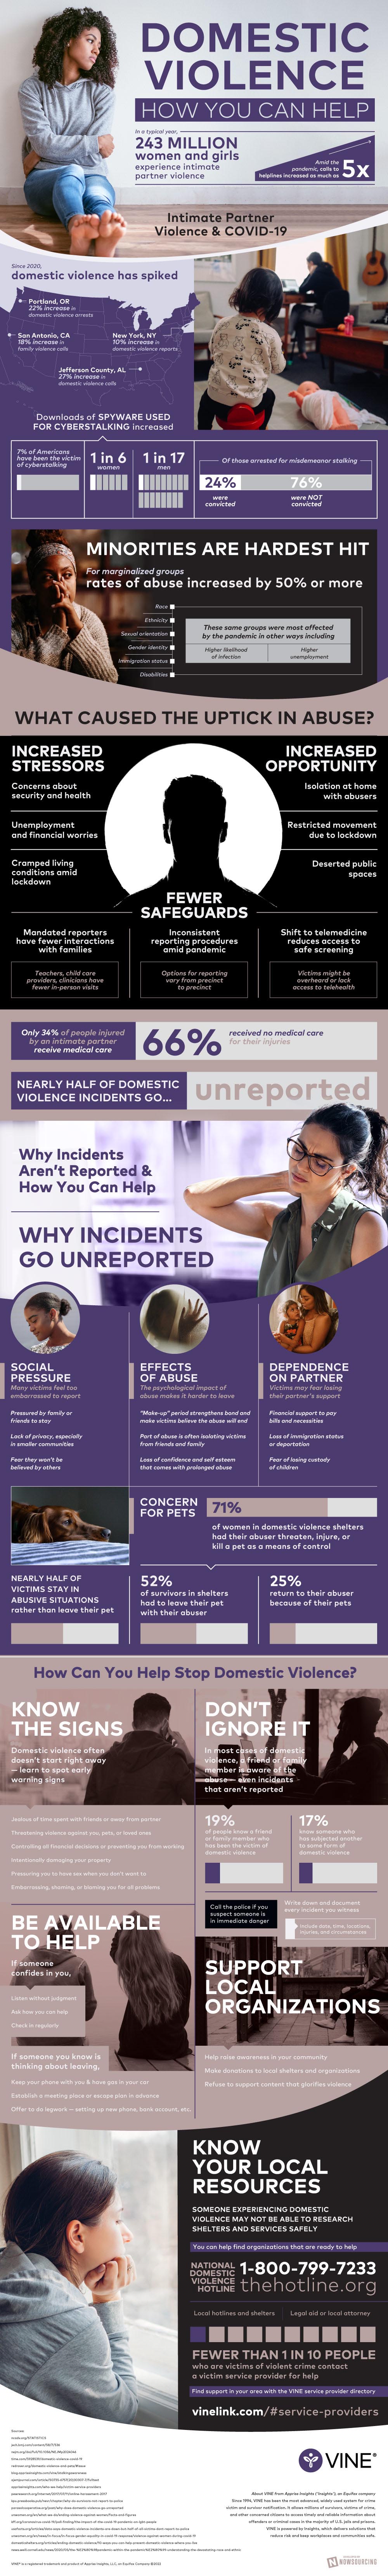 Online Resources for Domestic Violence